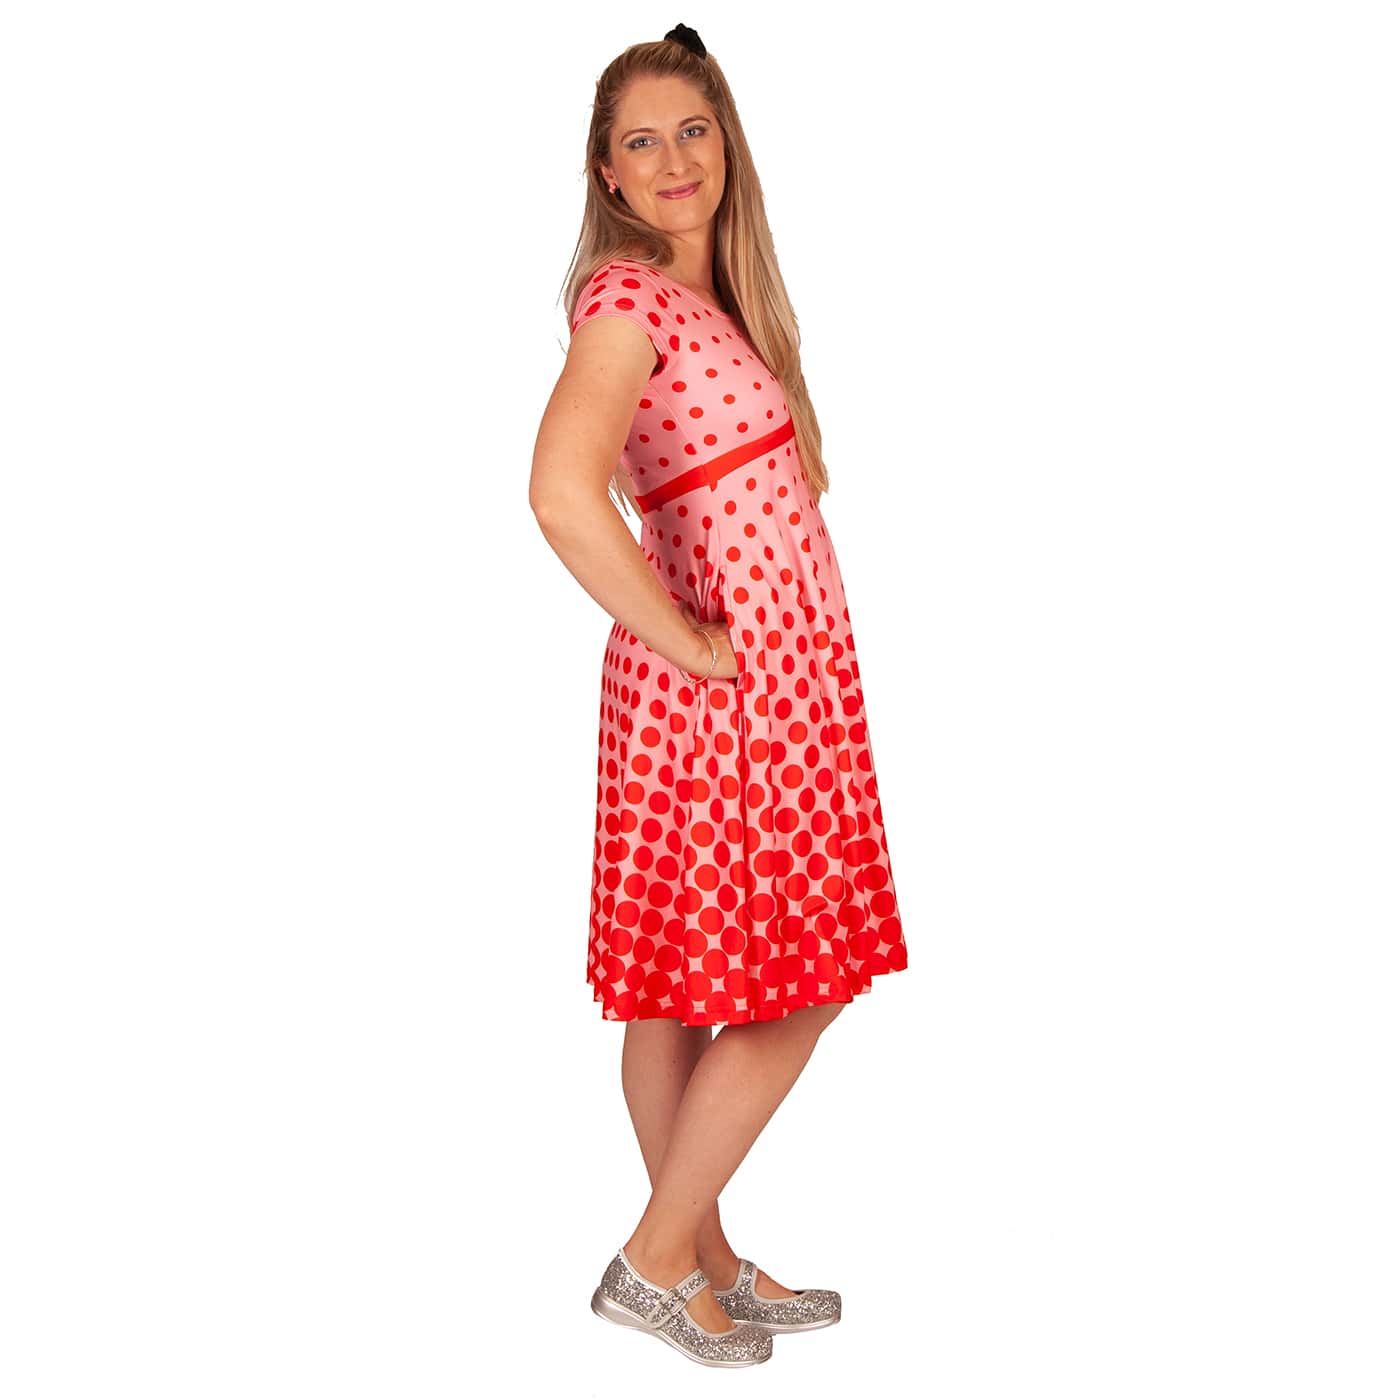 Blush Tea Dress by RainbowsAndFairies.com (Red Pink - Polka Dot - Psychedelic - Dress With Pockets - Pin Up - Rockabilly - Rock & Roll) - SKU: CL_TEADR_BLUSH_ORG - Pic 08